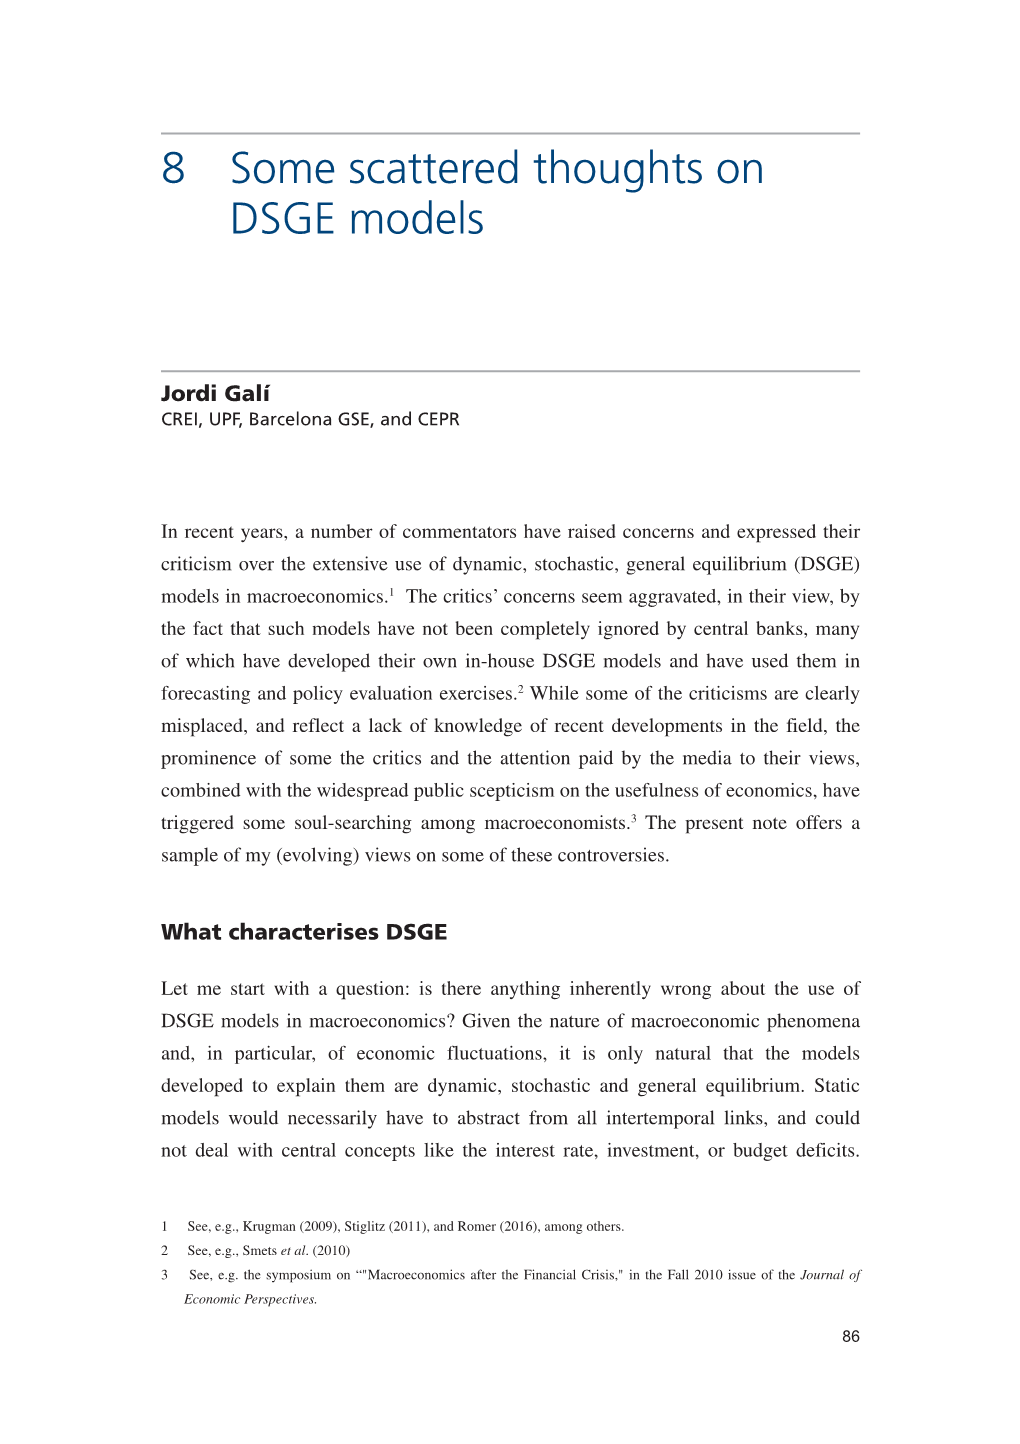 8 Some Scattered Thoughts on DSGE Models